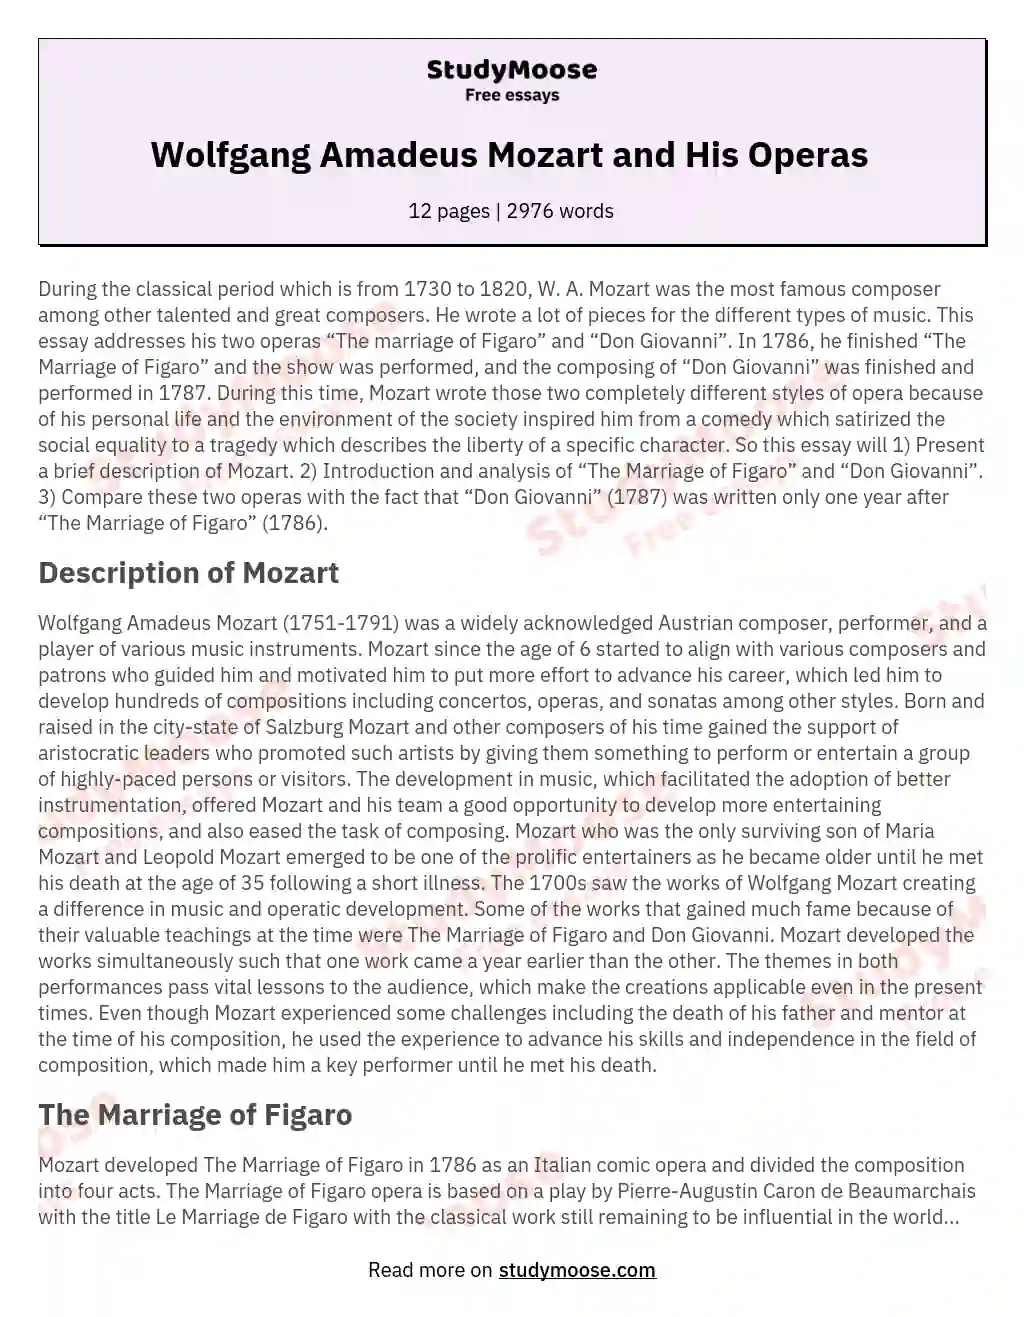 Wolfgang Amadeus Mozart and His Operas  essay